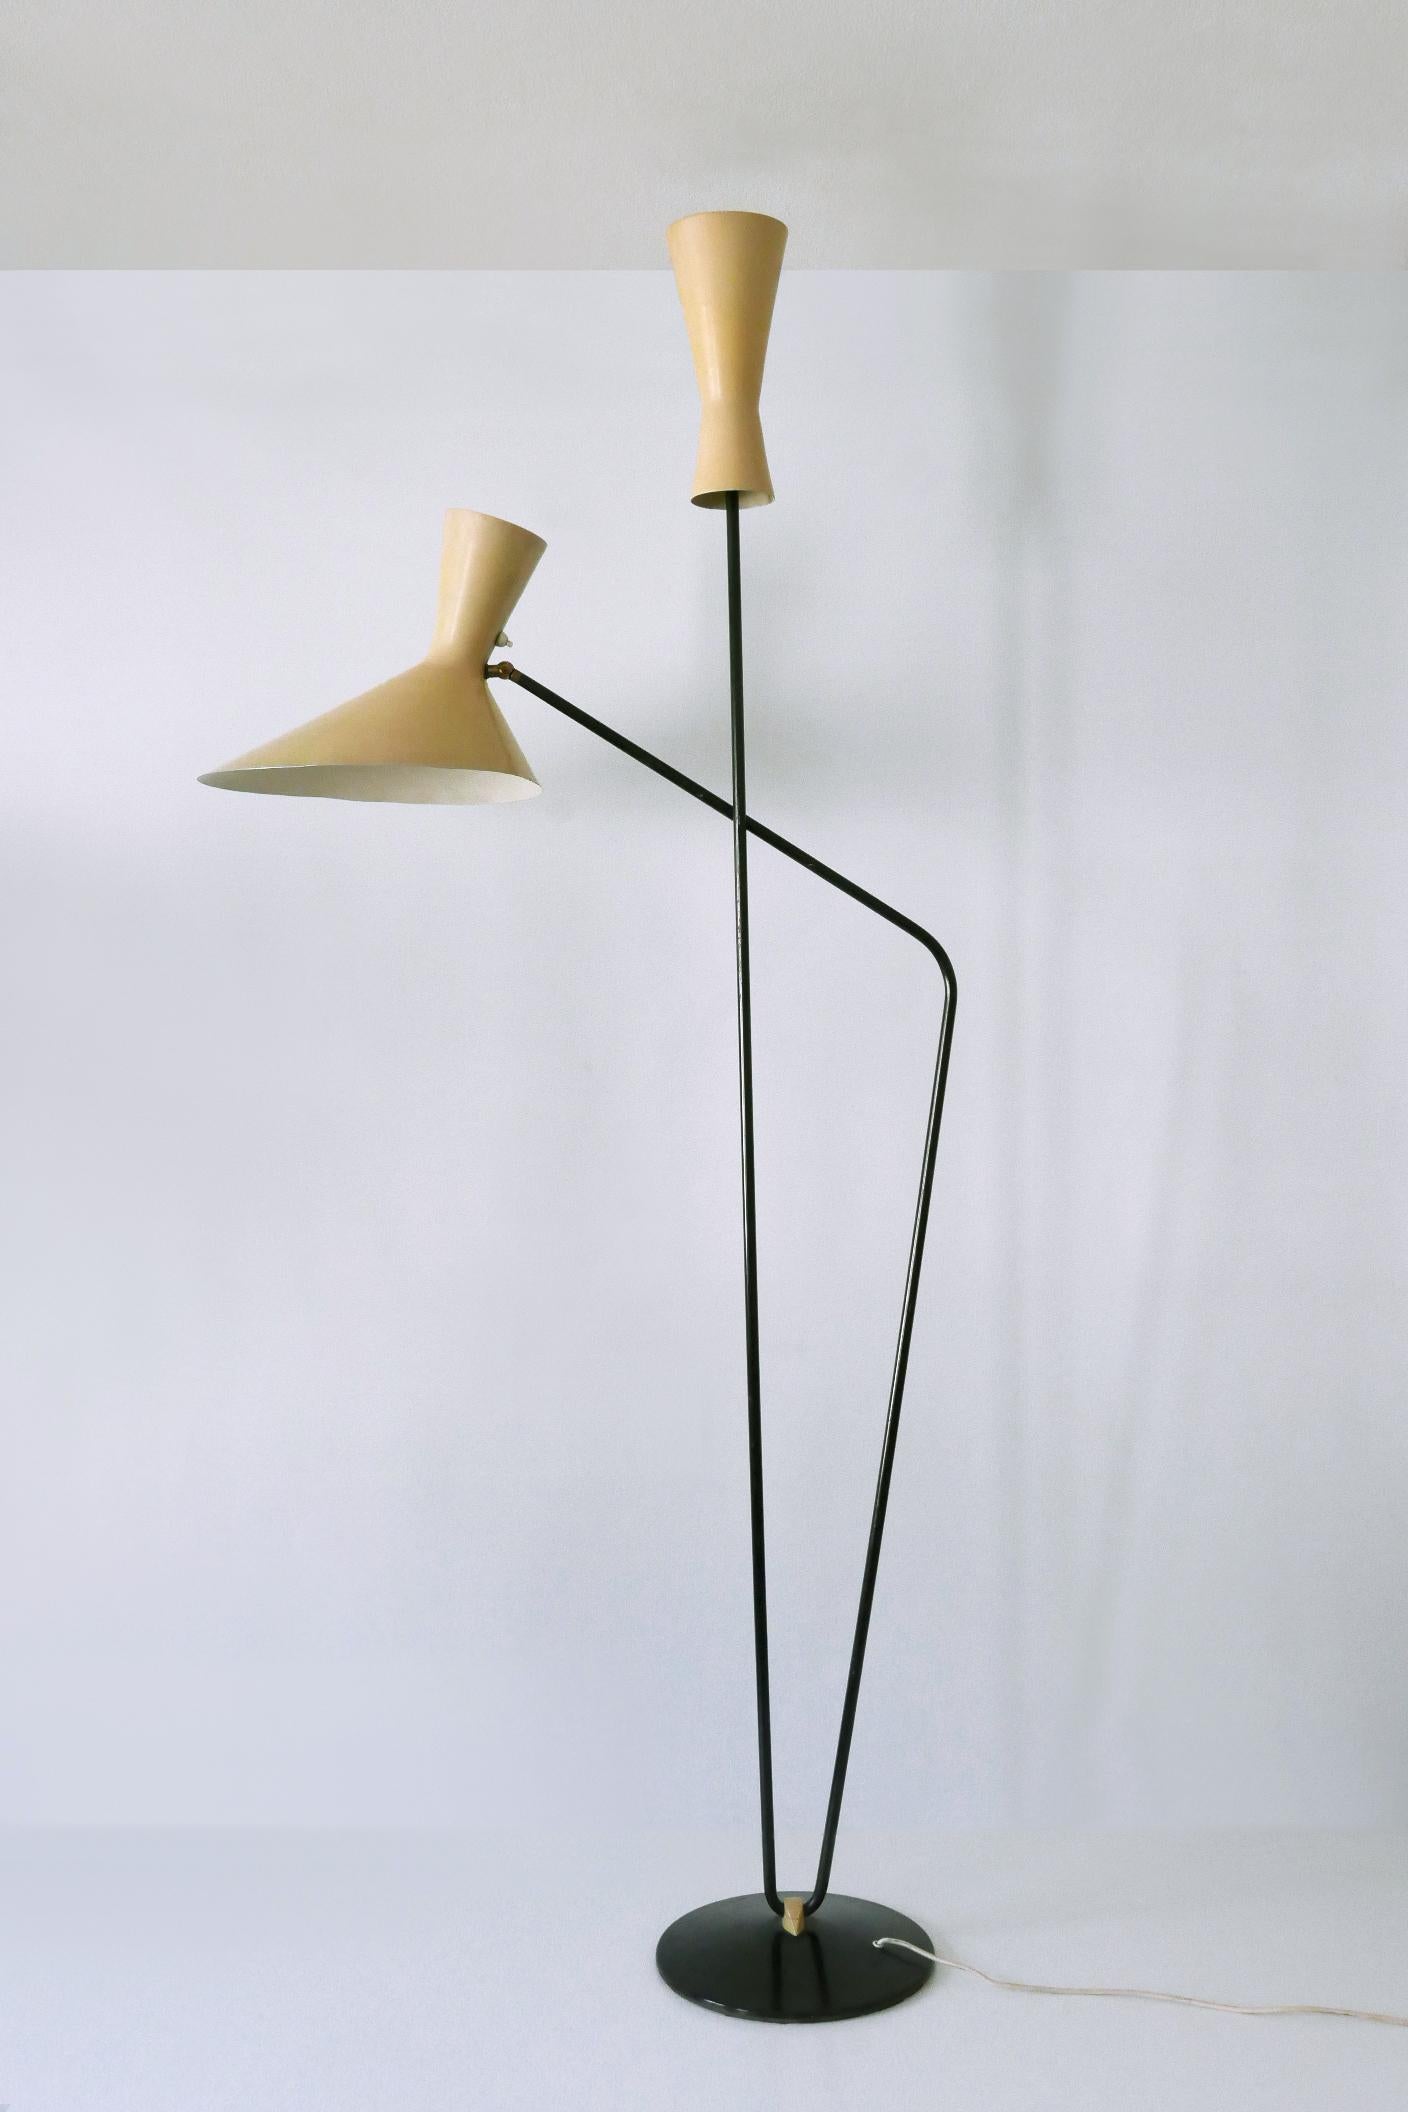 Rare Iconic Mid-Century Modern Floor Lamp by Prof. Carl Moor for BAG Turgi 1950s For Sale 3